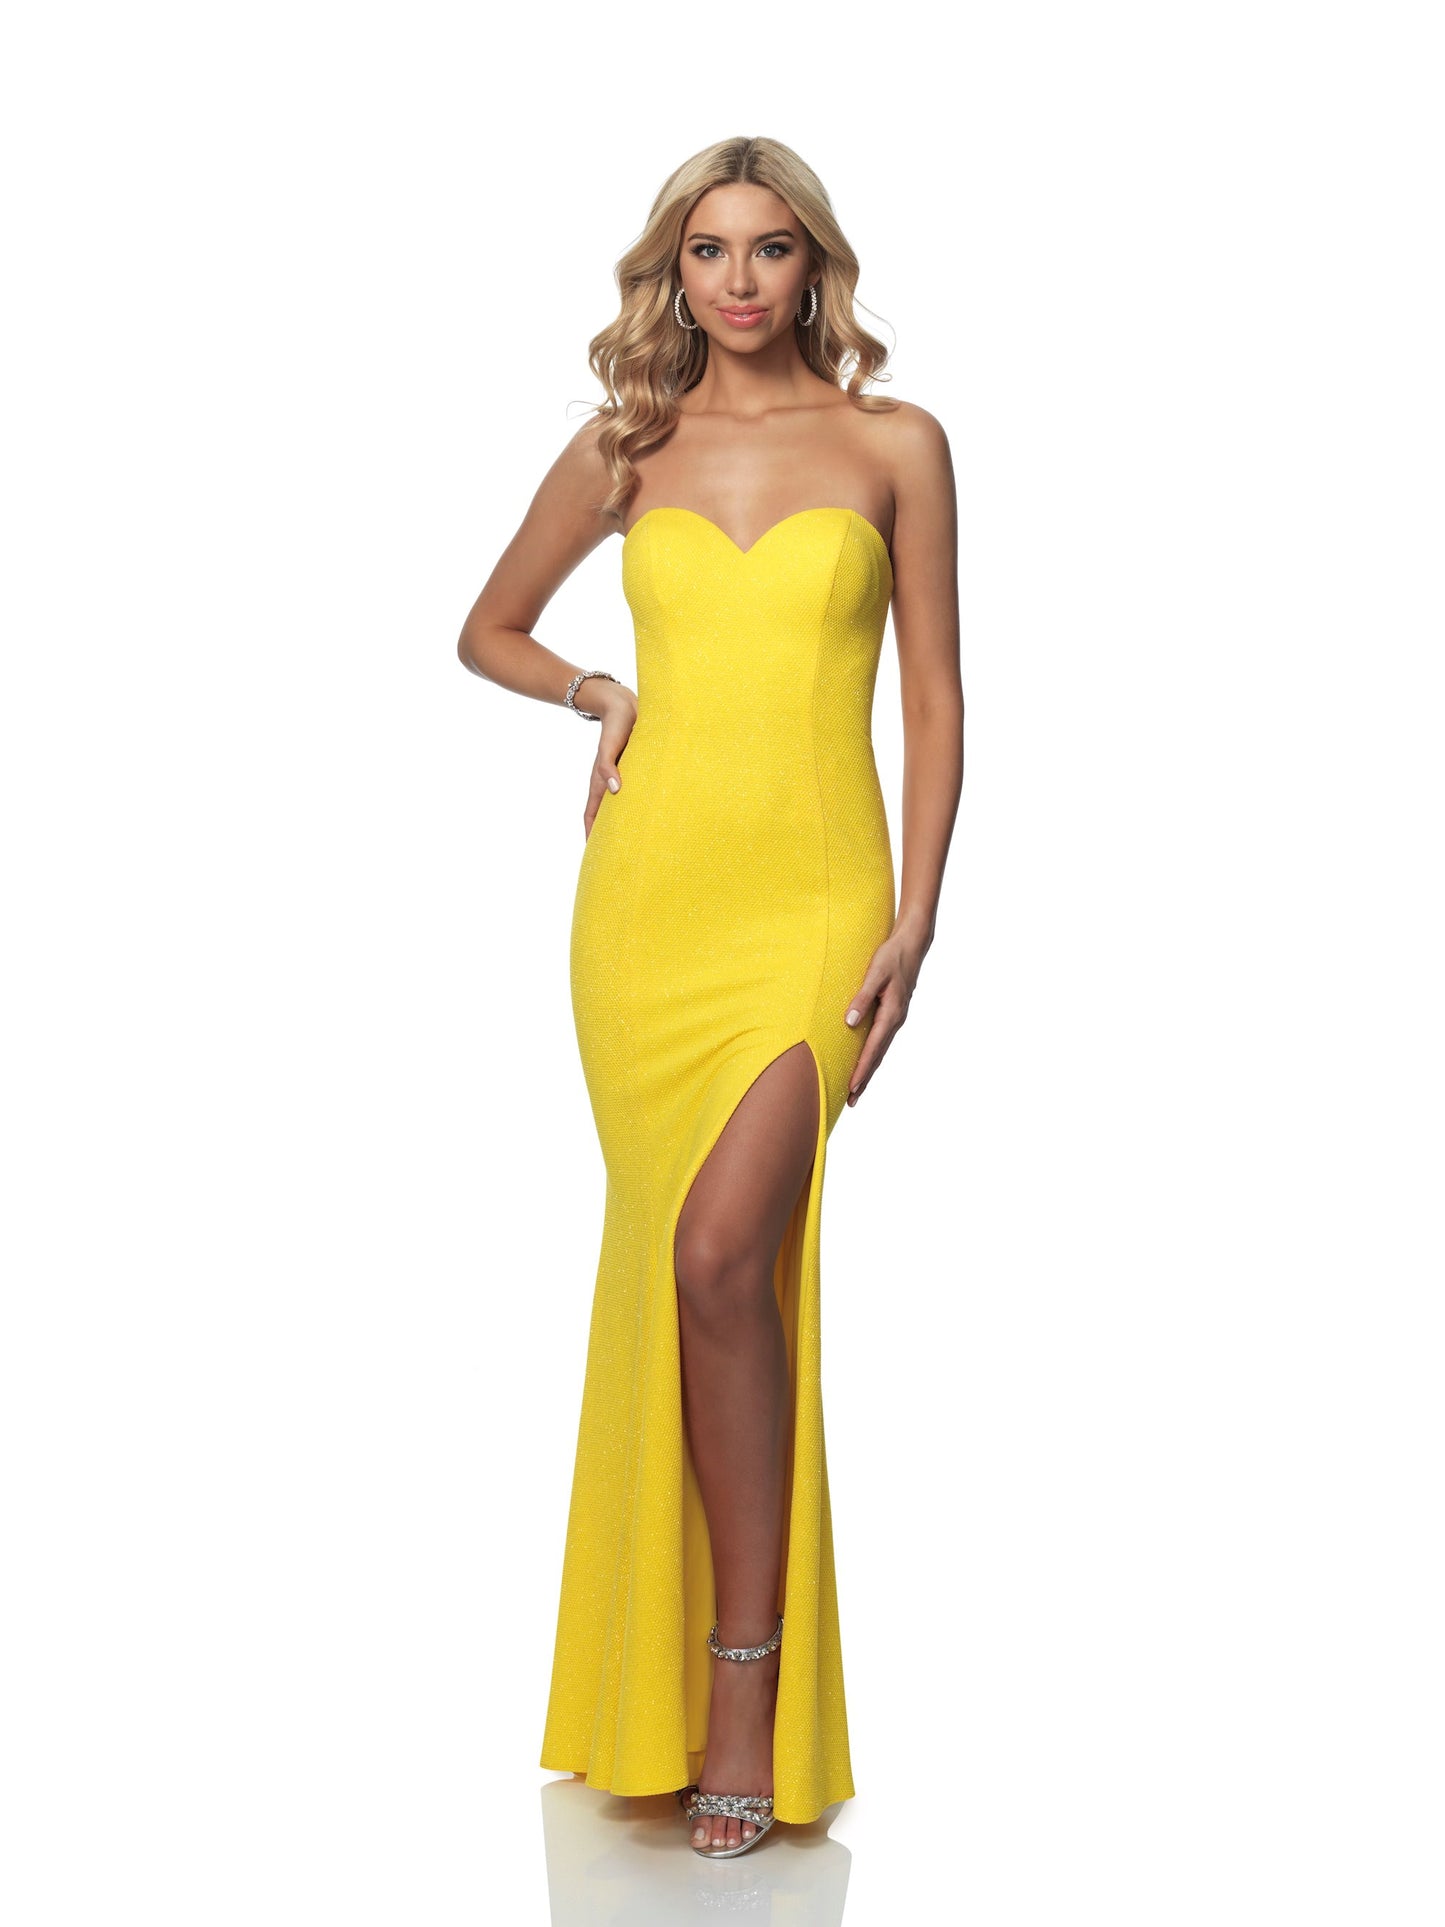 Blush Prom 11973 Size 8 Long Yellow Prom Dress Slit Fitted Strapless Slit Gown